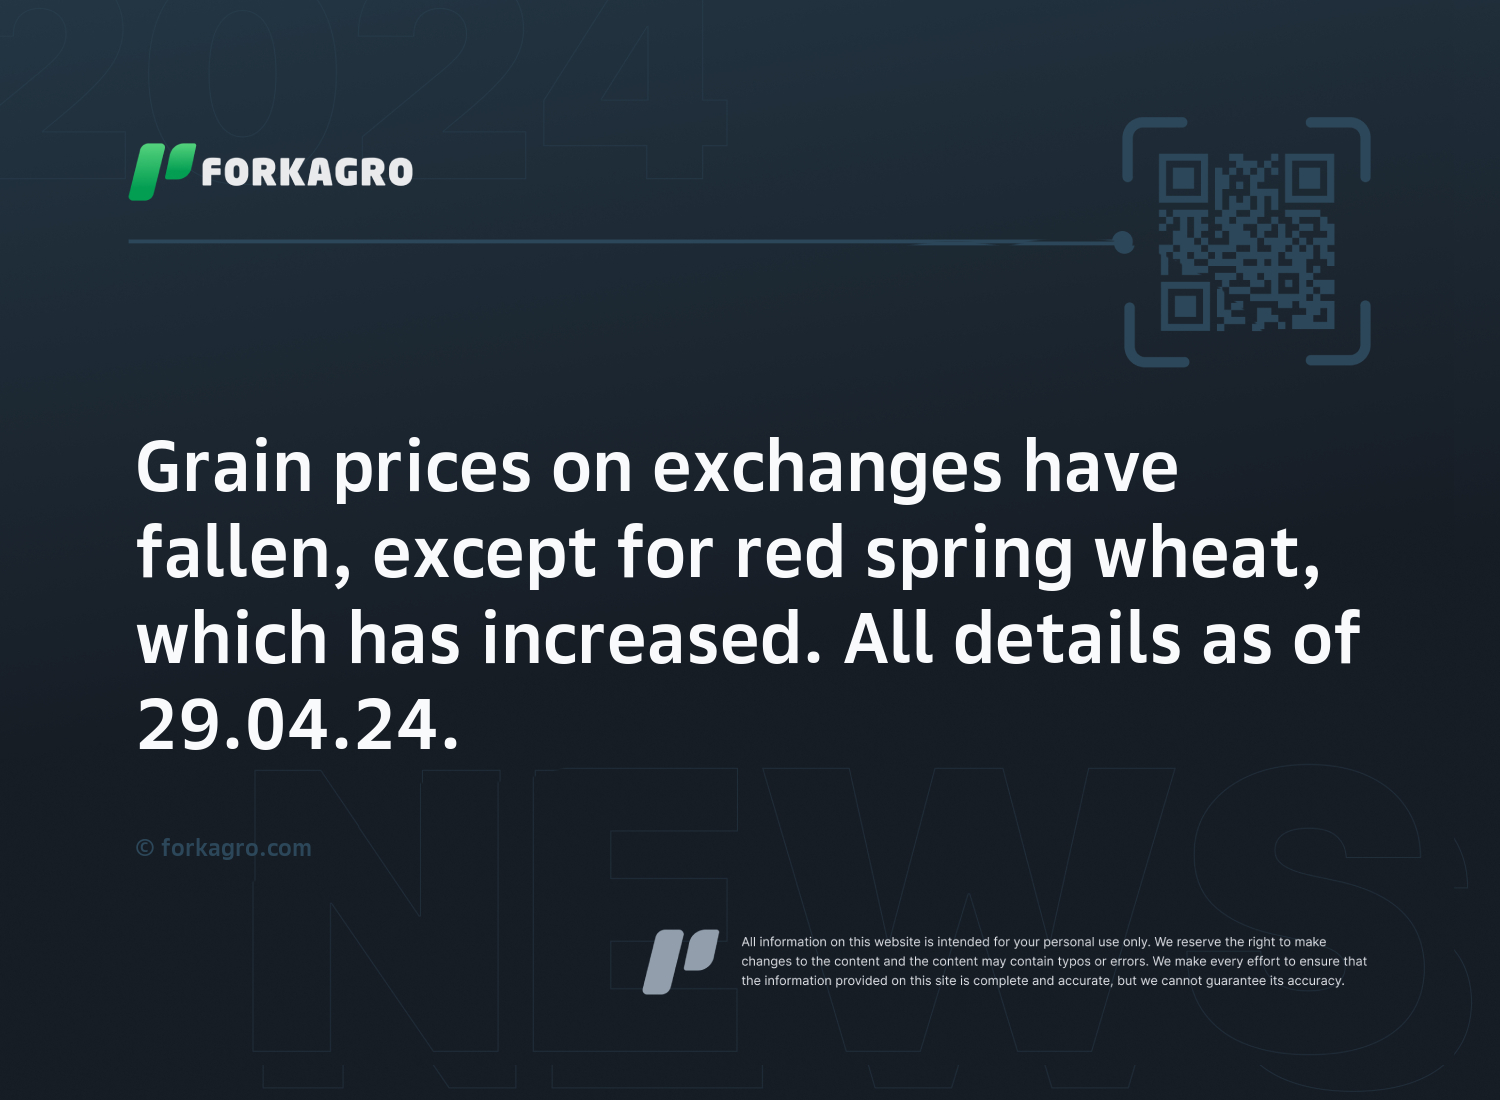 Grain prices on exchanges have fallen, except for red spring wheat, which has increased. All details as of 29.04.24.